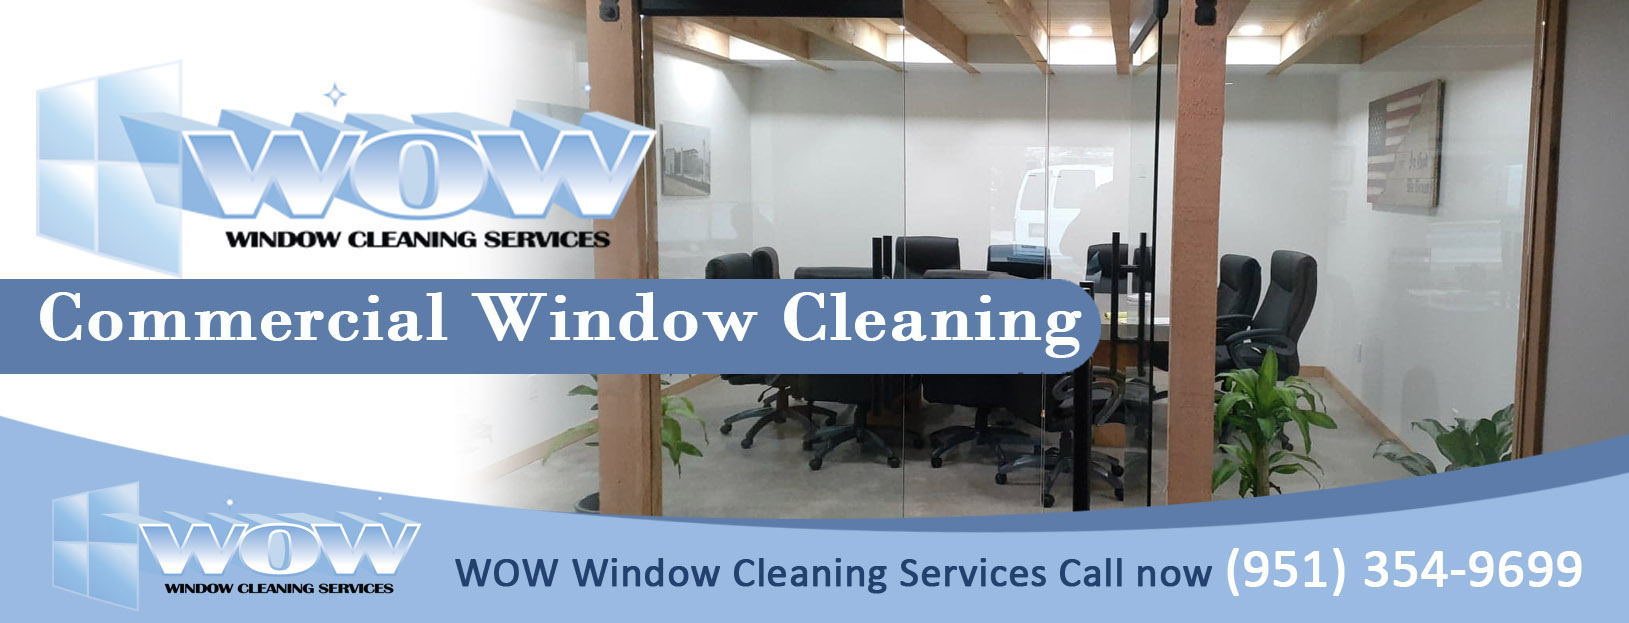 Moreno Valley Riverside Windown Cleaning, house pressure wash, shutters 7